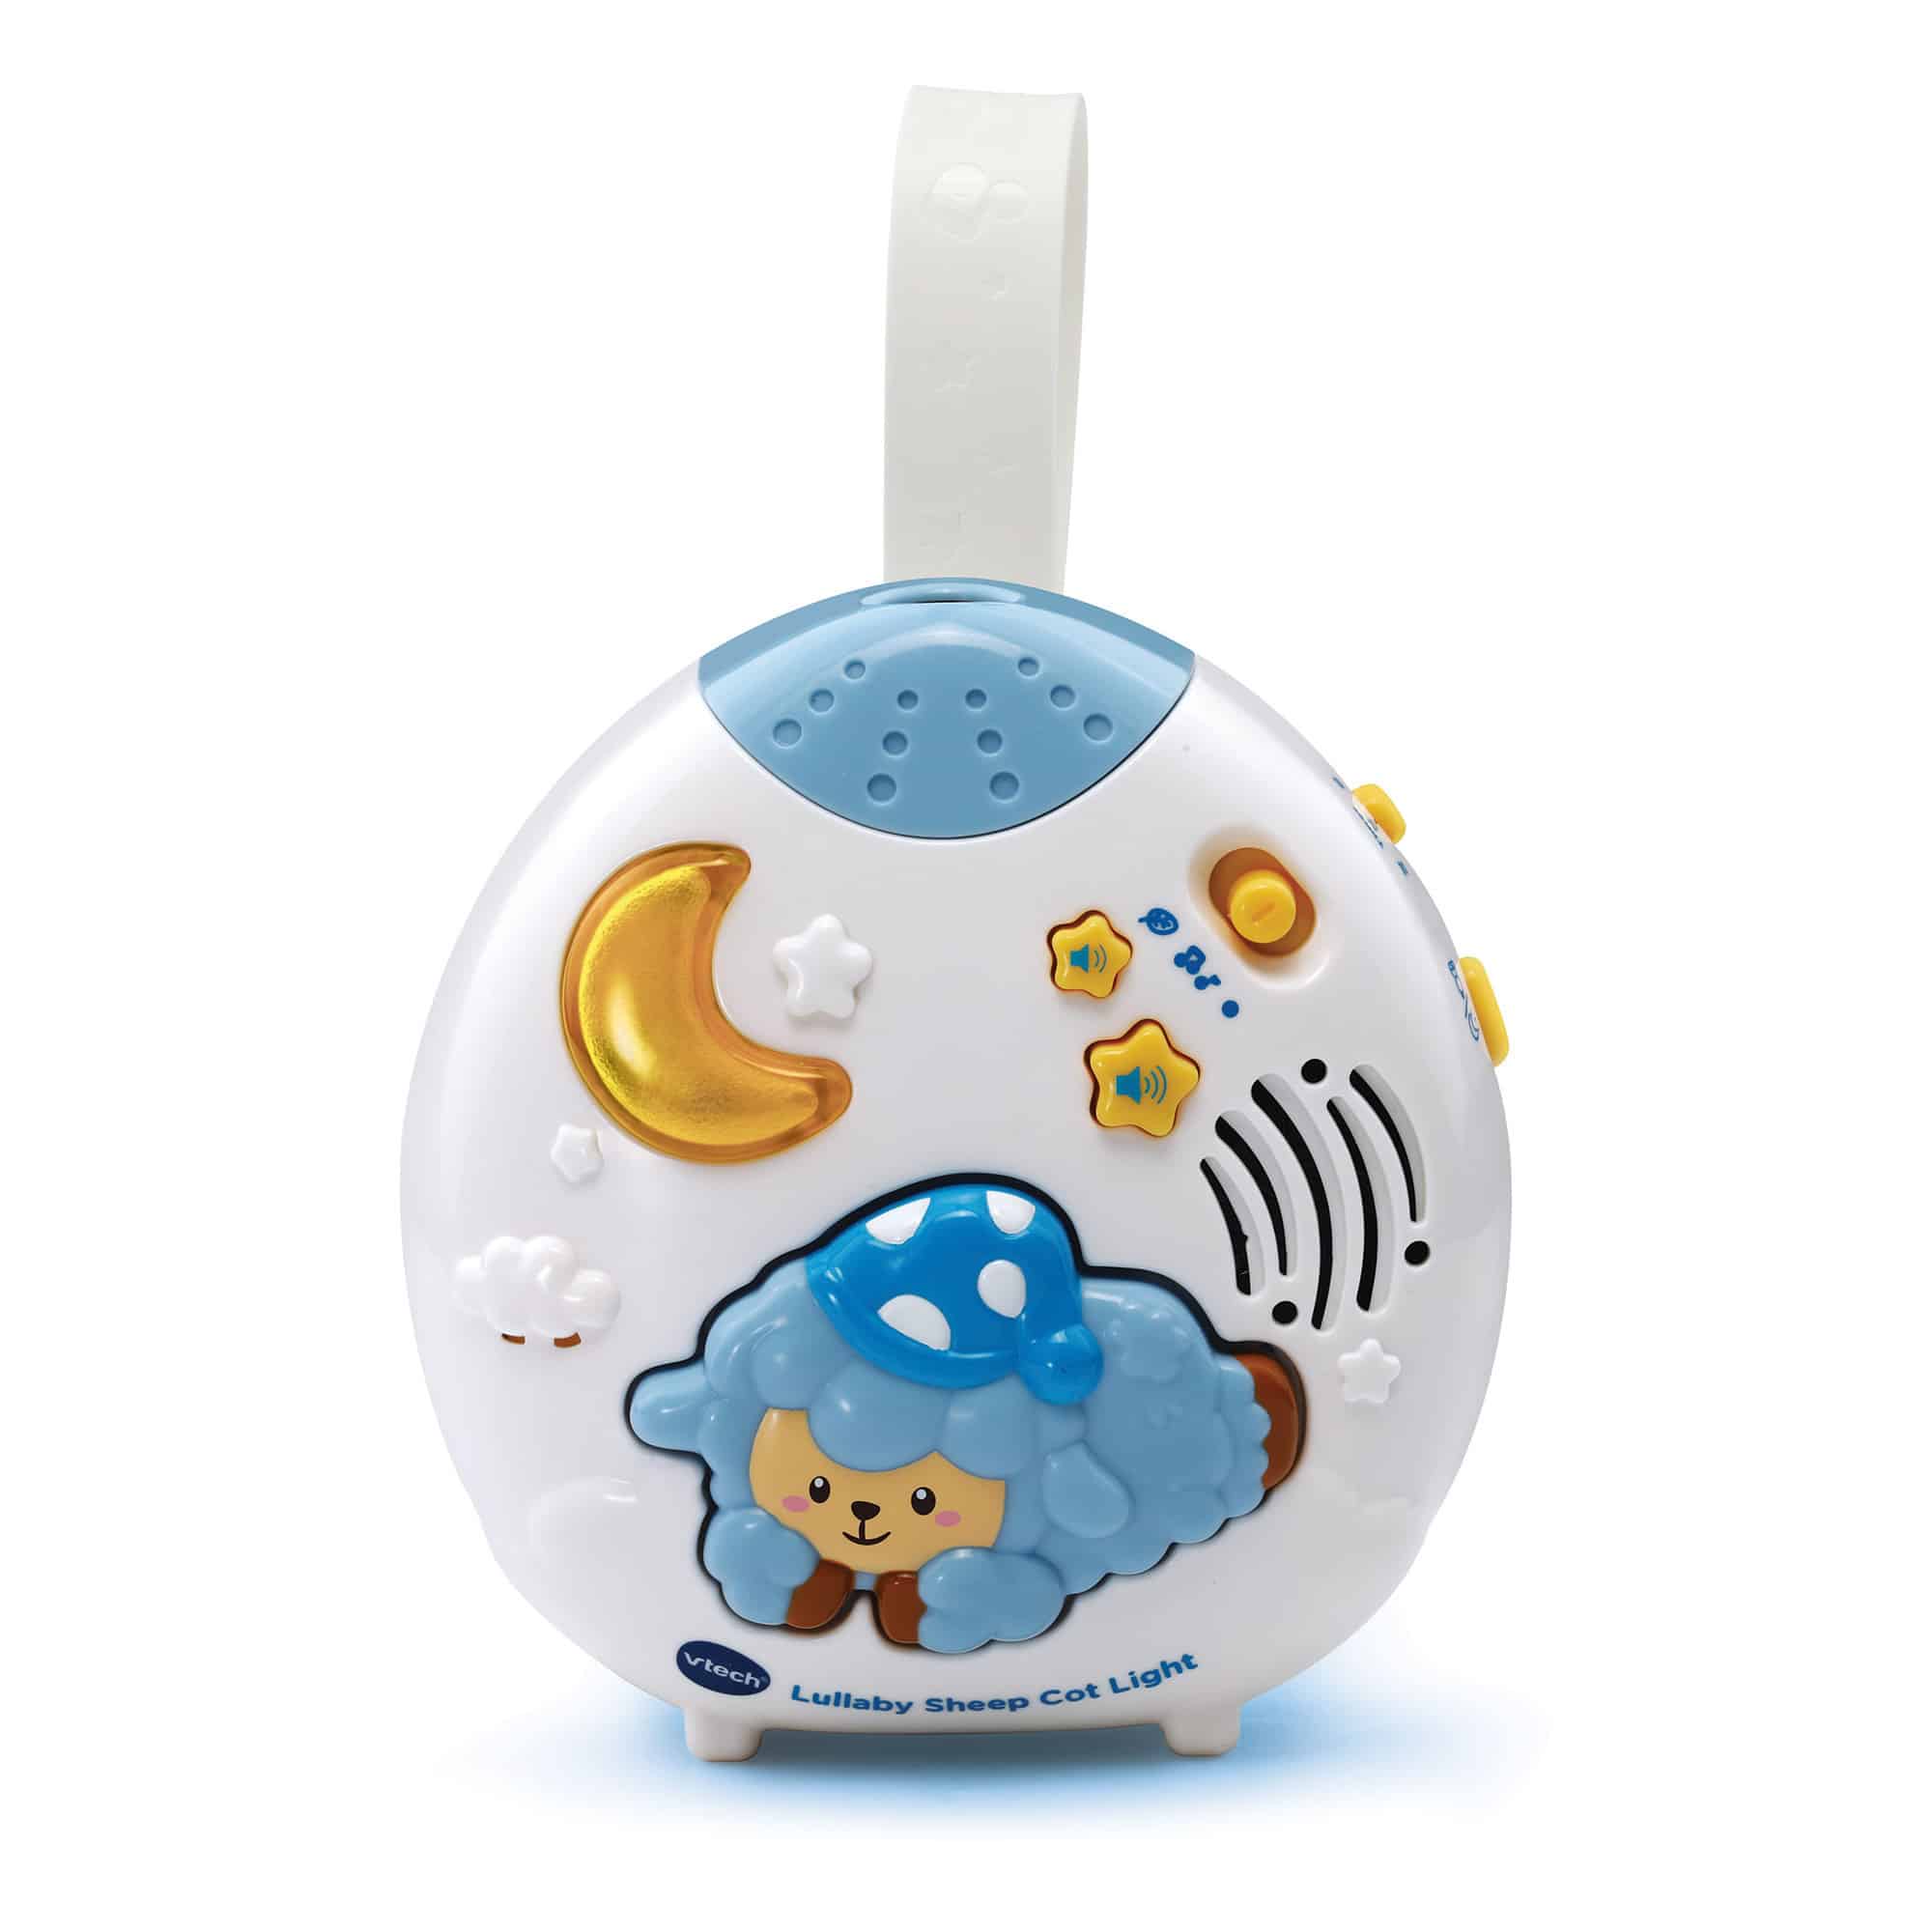 Vtech Baby - Lullaby Sheep Cot Light